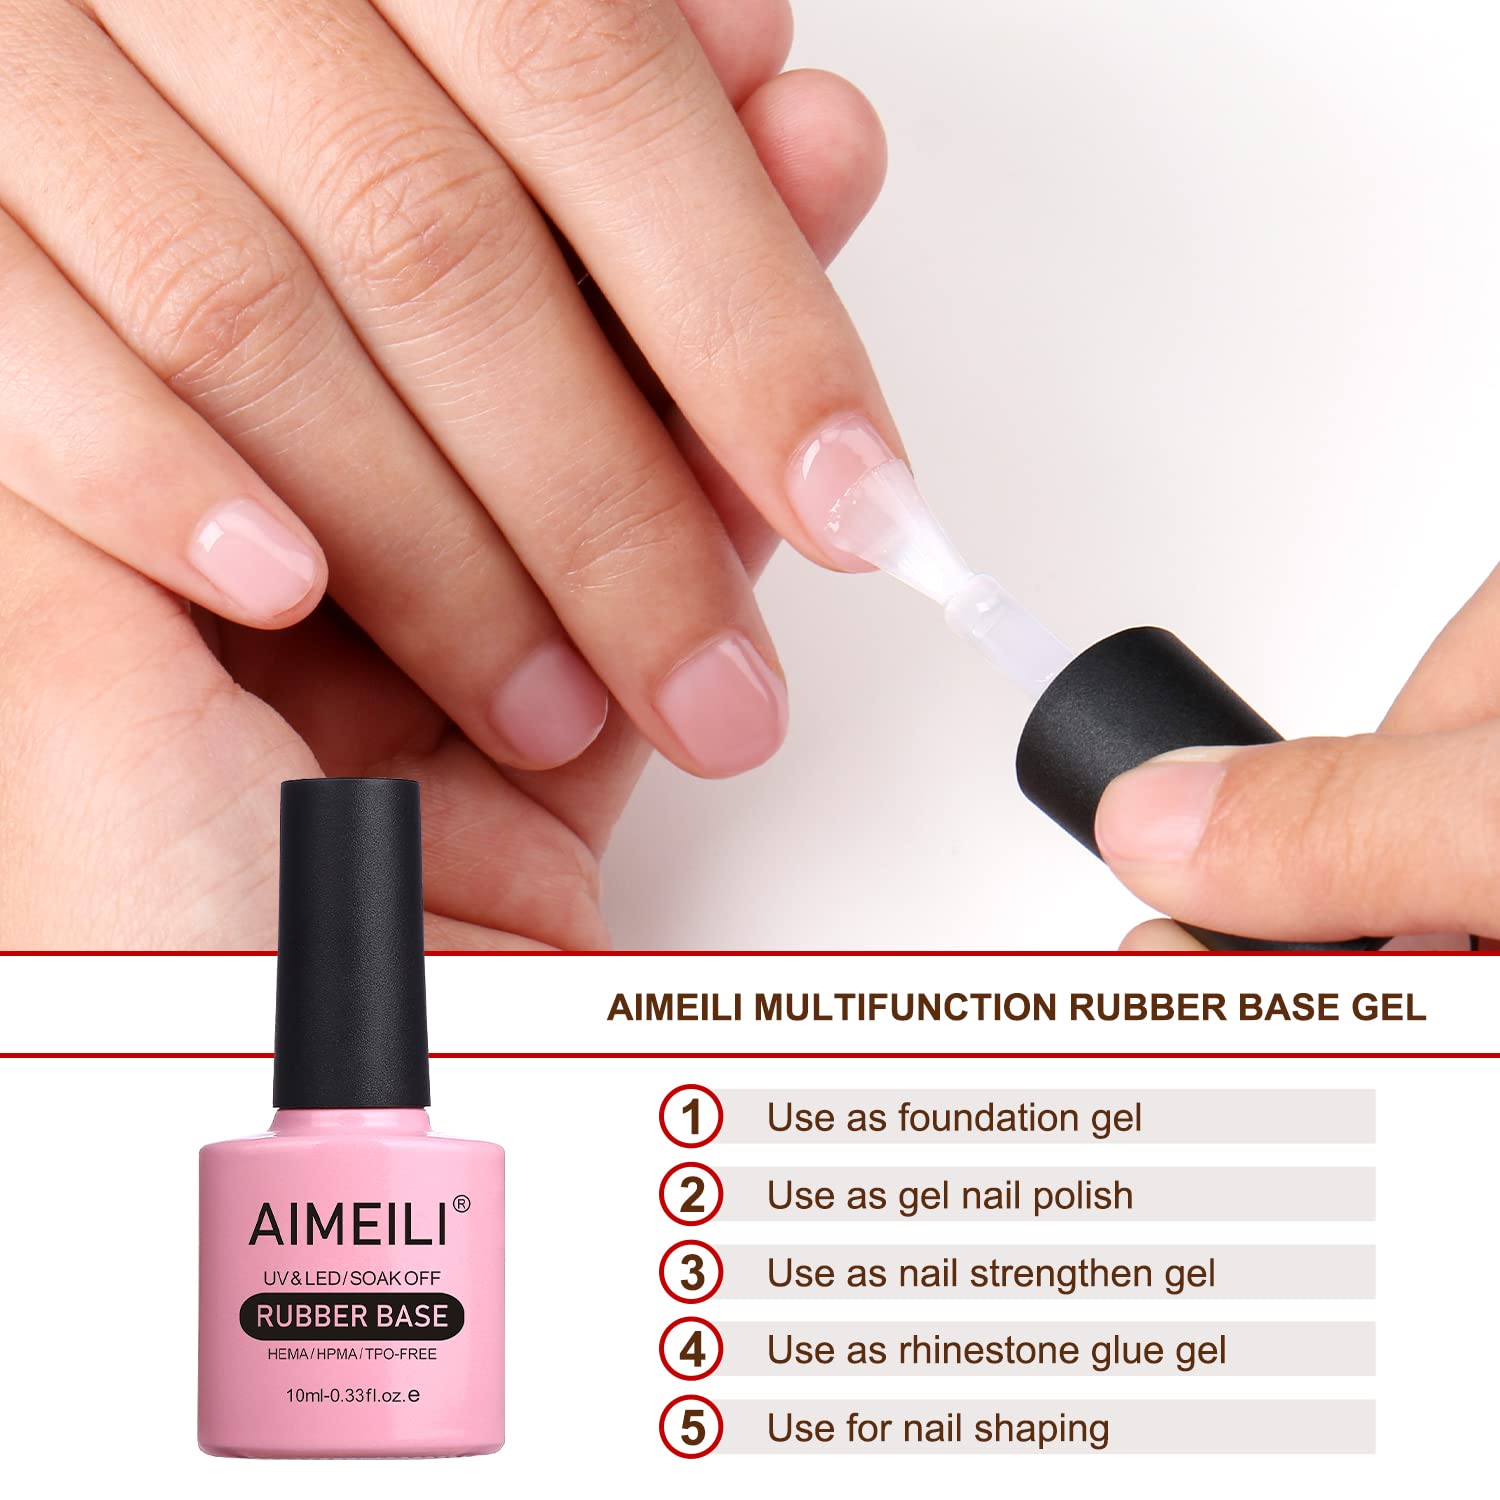 Rubber Base Gel in Bottle Clear 19 Colors HEMA, HPMA & TPO Free Uv/led 15ml  Soak off Clear Non-yellowing Gel Nails 